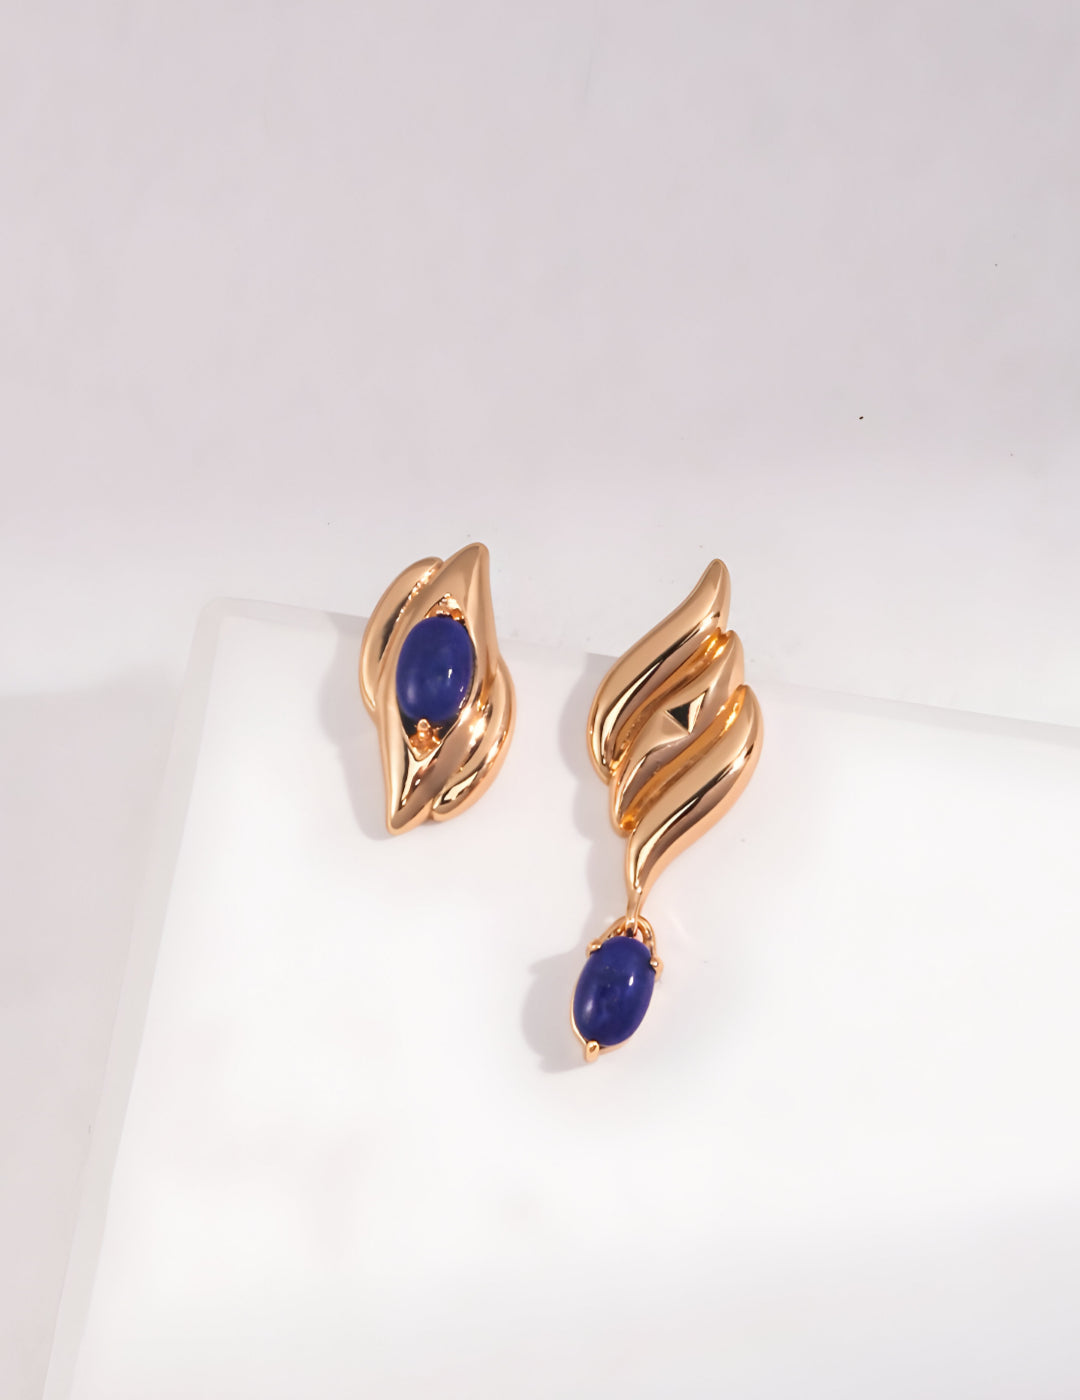 Capturing the essence of artistic beauty - Expressive Earrings - S925 Sterling Silver with 18K Gold Vermeil- Embed with natural blue gemstone - Crafted to add a touch of enchantment and allure to your everyday look